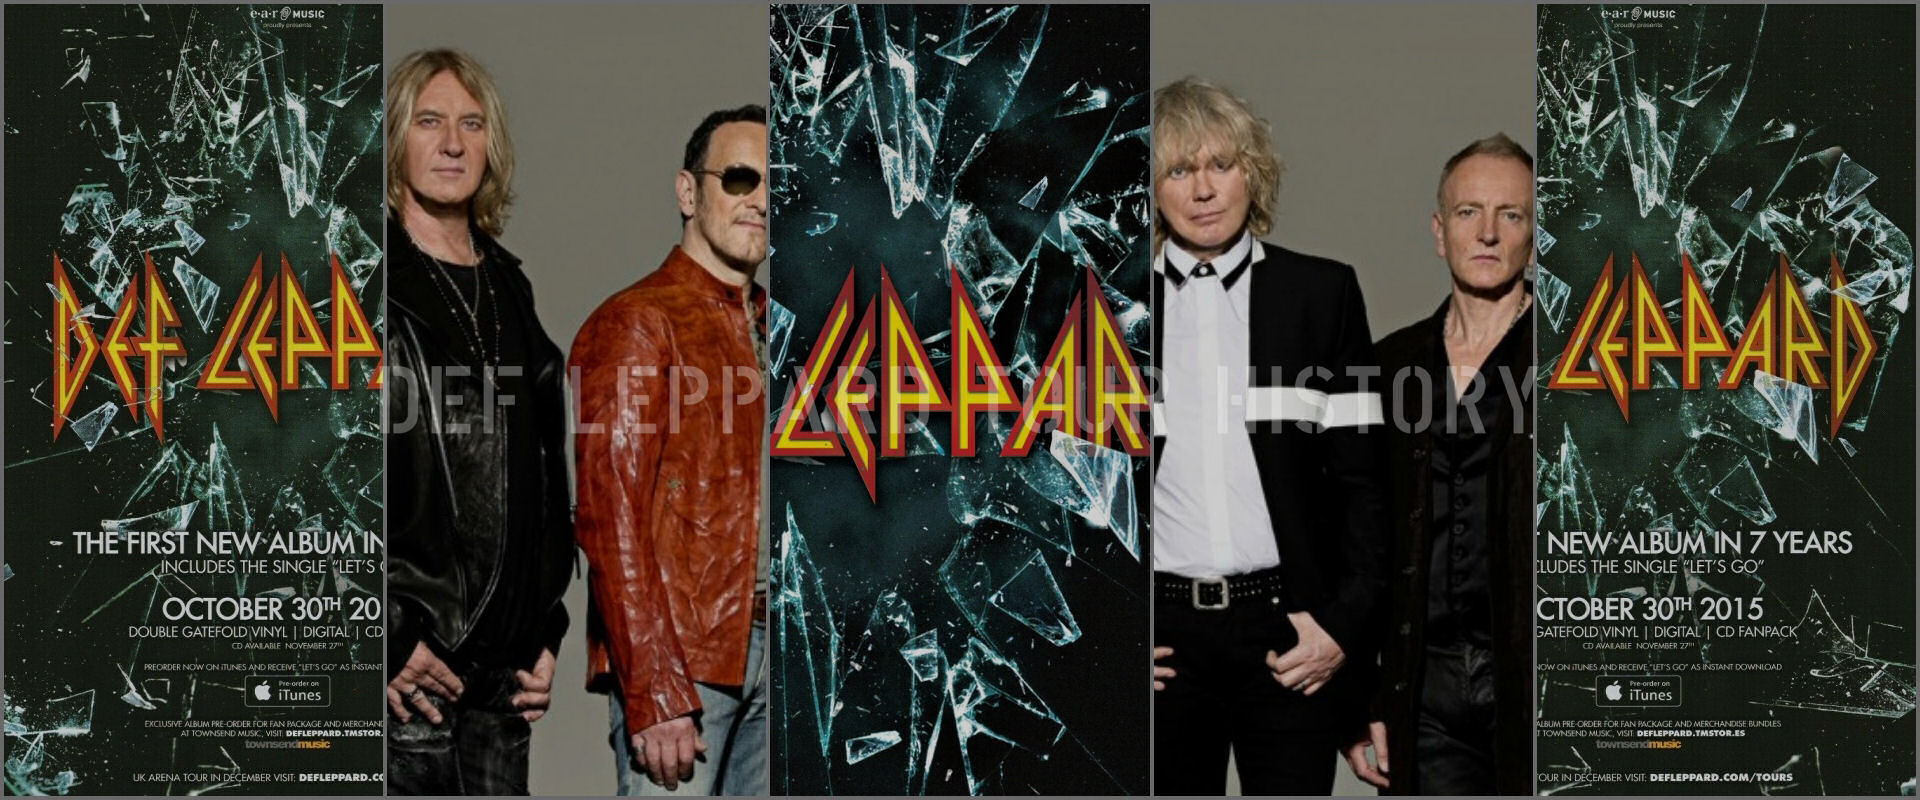 Def Leppard History 30th October 2015 Def Leppard Album Release